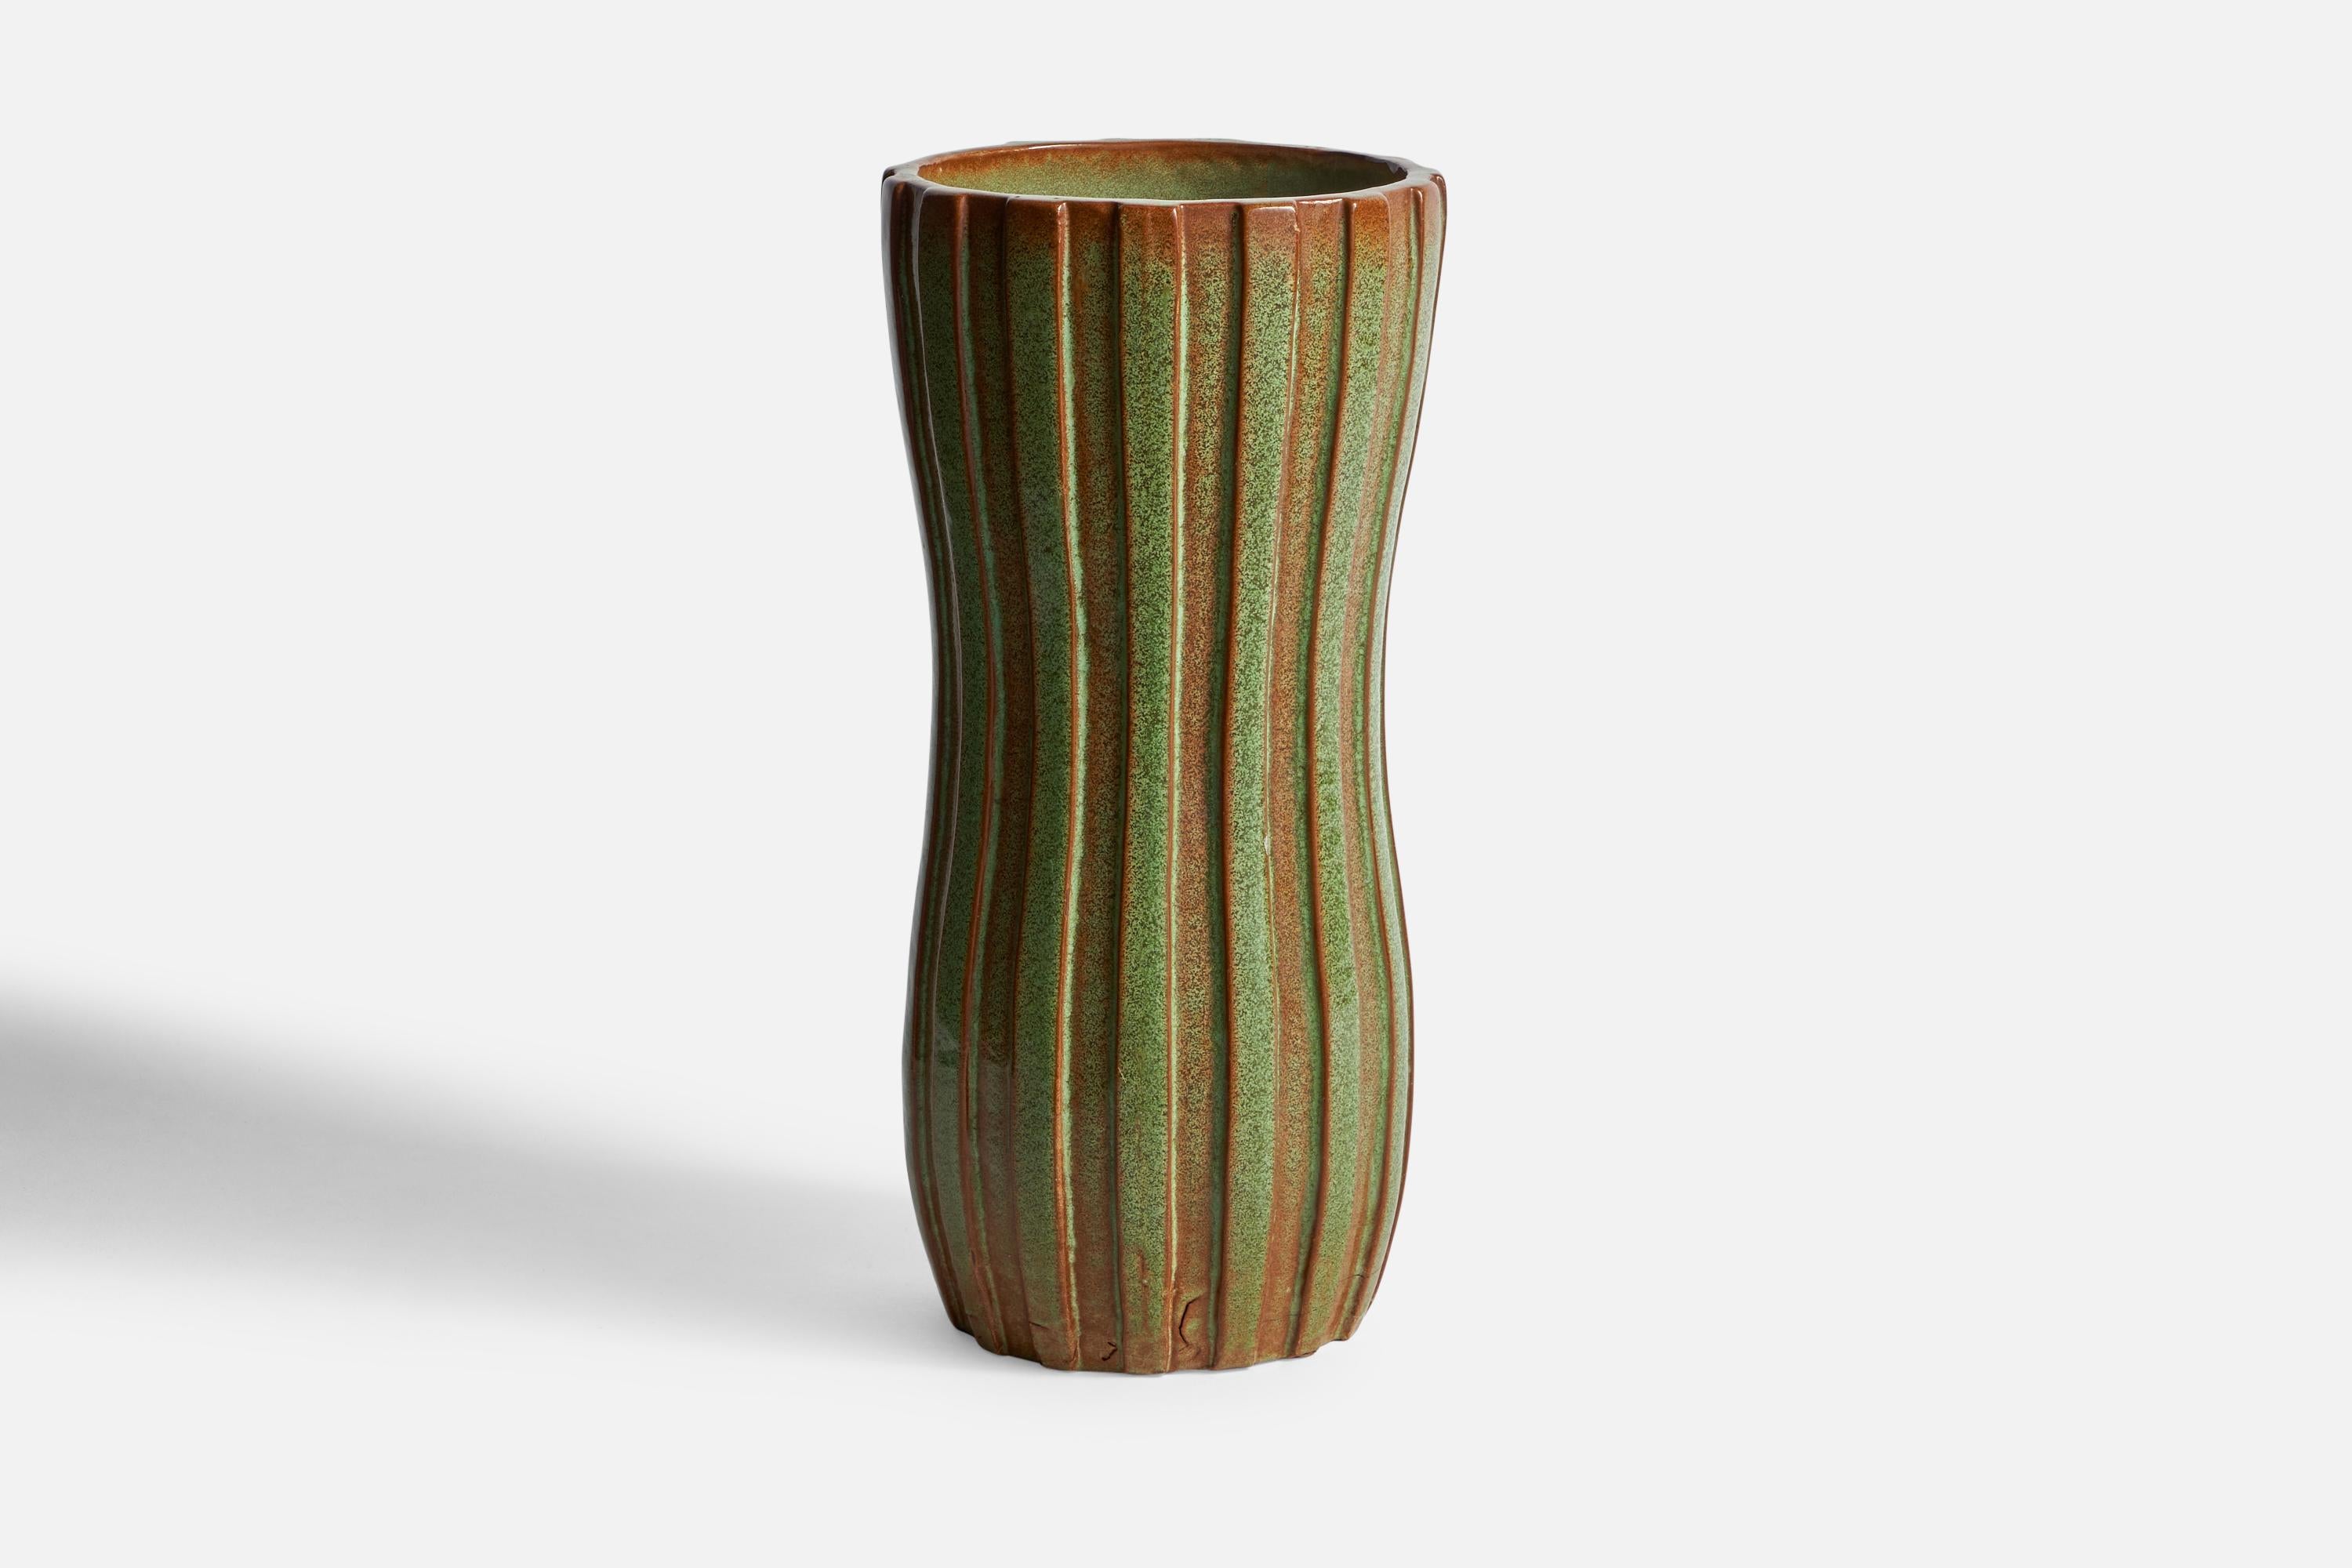 A sizeable green-glazed and fluted vase designed and produced by Andersson & Johansson, Höganäs, Sweden, c. 1940s.

